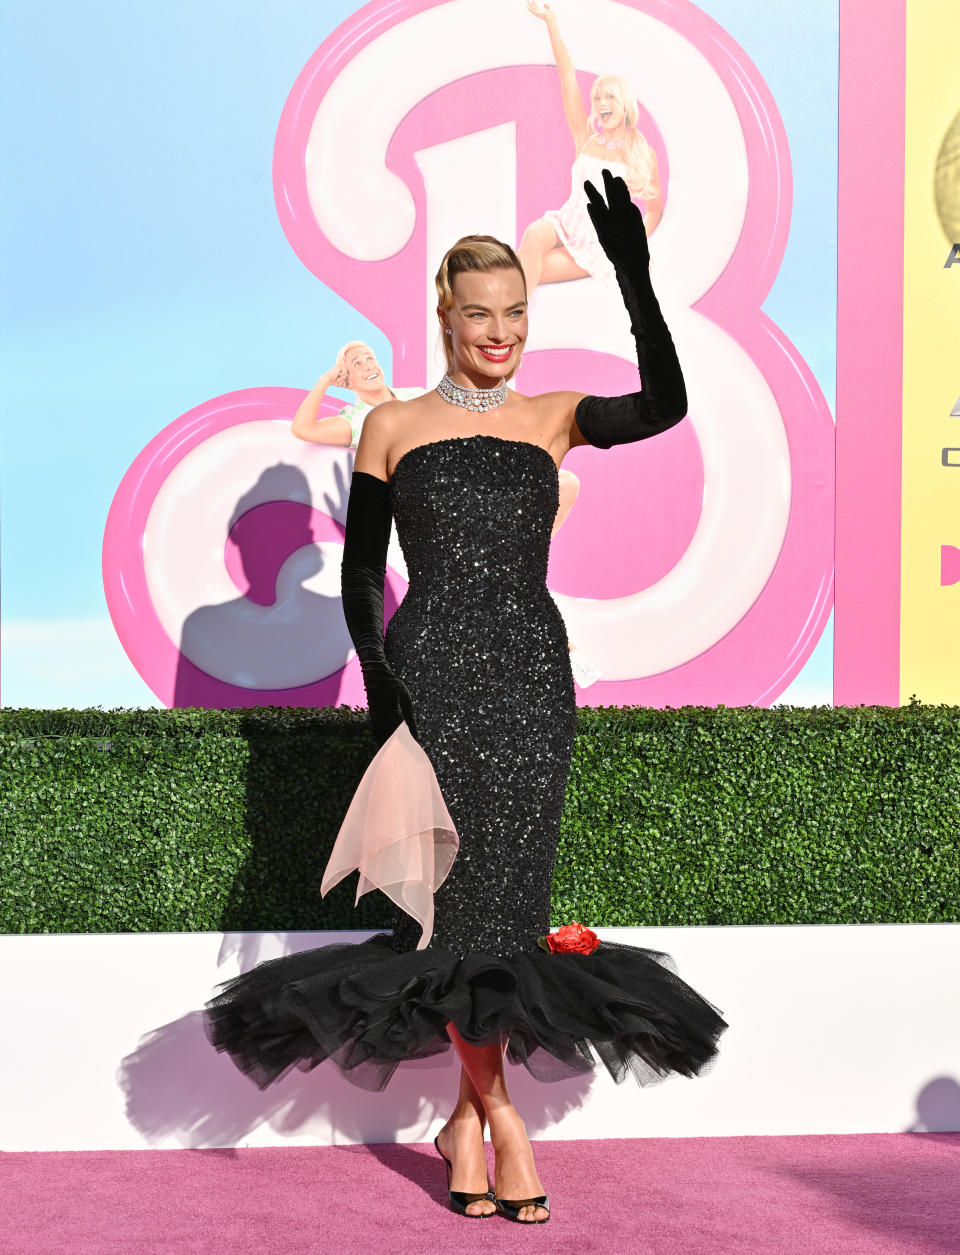 Margot Robbie in a black gown with ruffled detail, waving on the 'Barbie' premiere backdrop